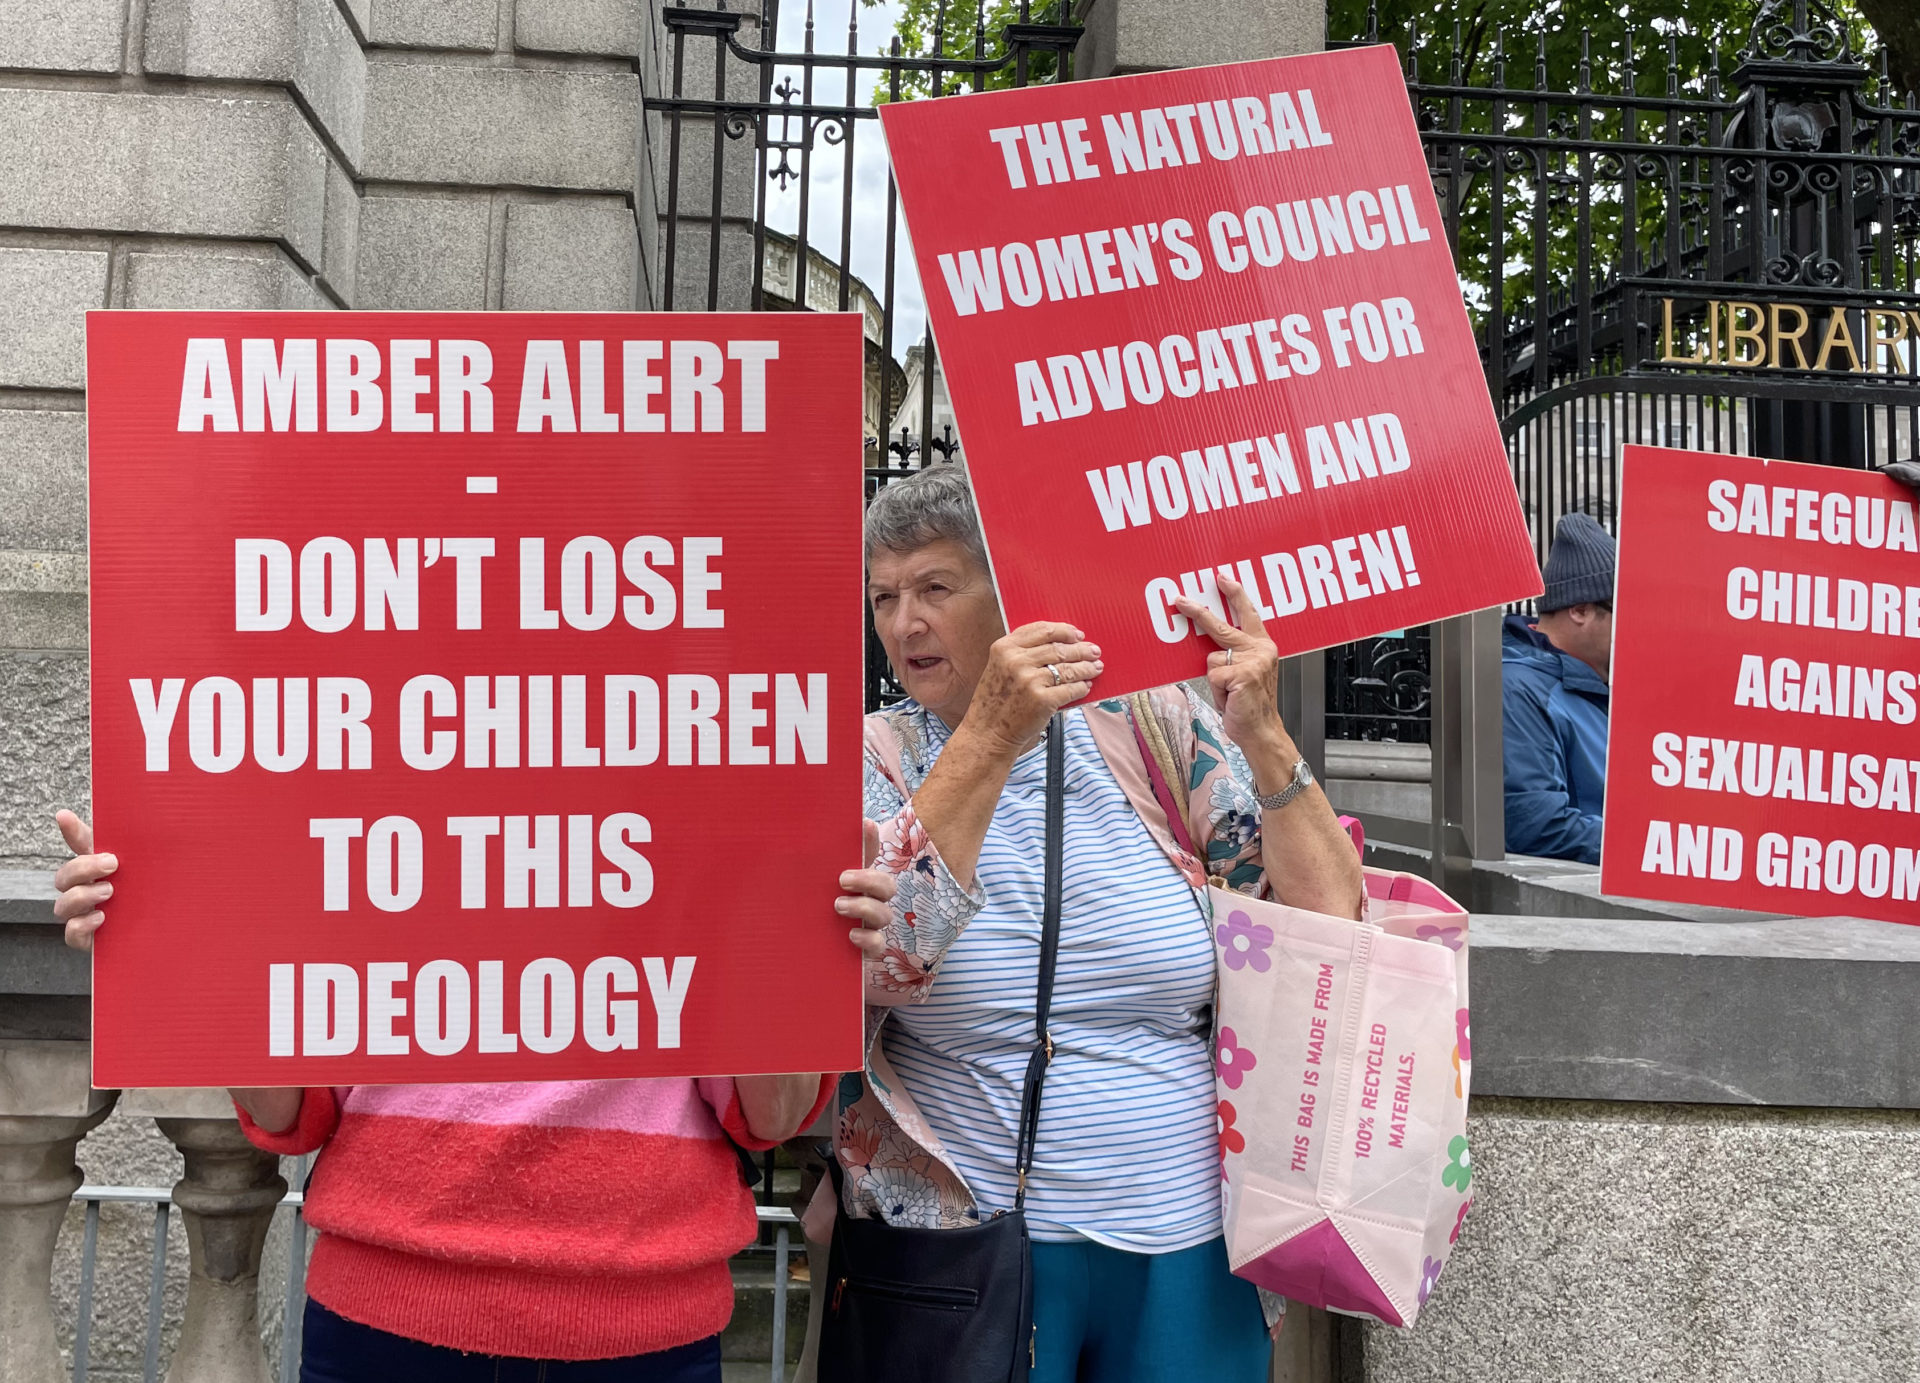 Protest outside the Dáil against the SPHE curriculum, with signs reading "Amber alert - don't lose your children to this ideology" and "The Natural Women's Council advocates for women and children!"